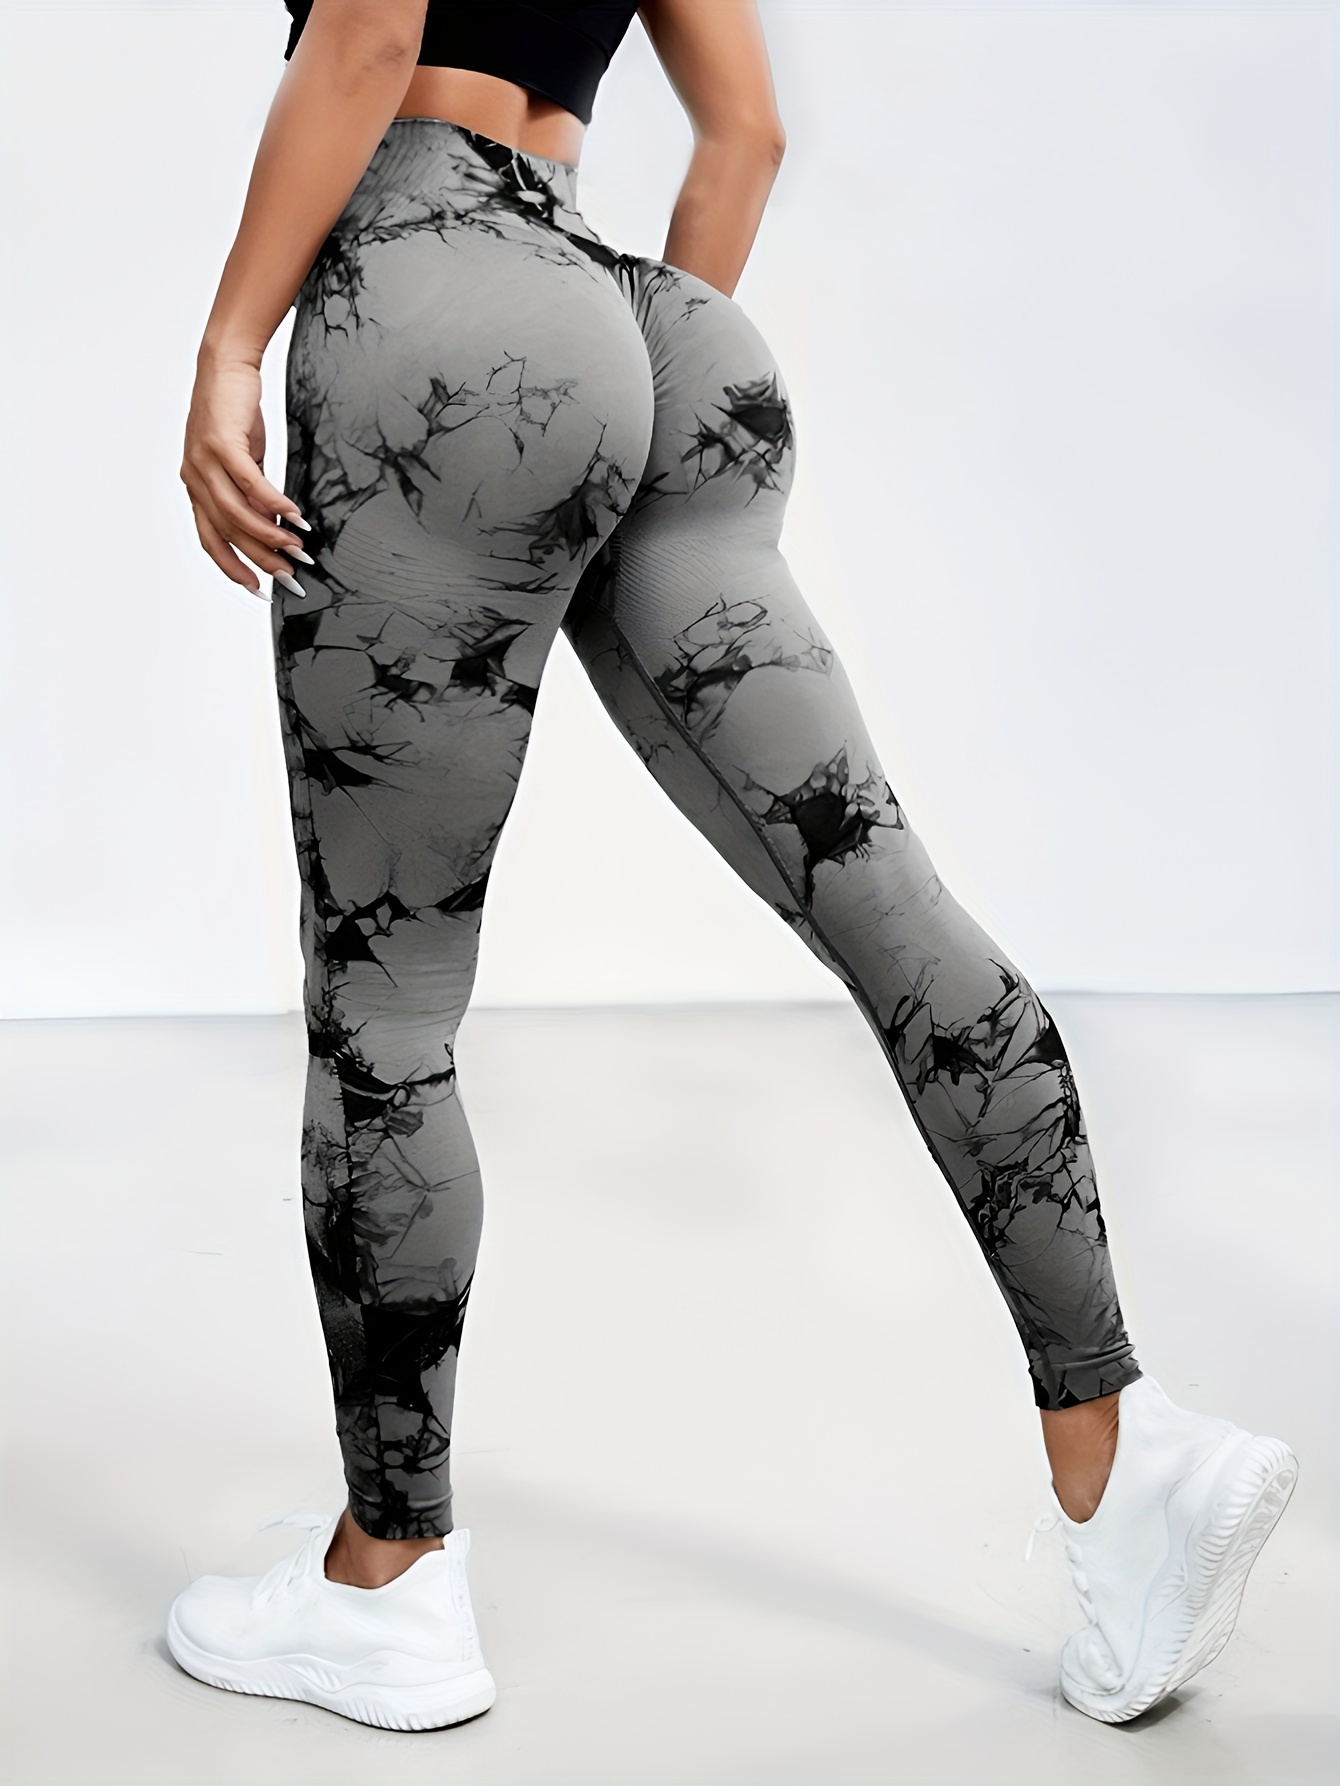 Paisley Printed Pattern High Waist And Hip Lifting Yoga Pants For Exercise  Fitness Training, High Stretch Sports Leggings, Women's Activewear